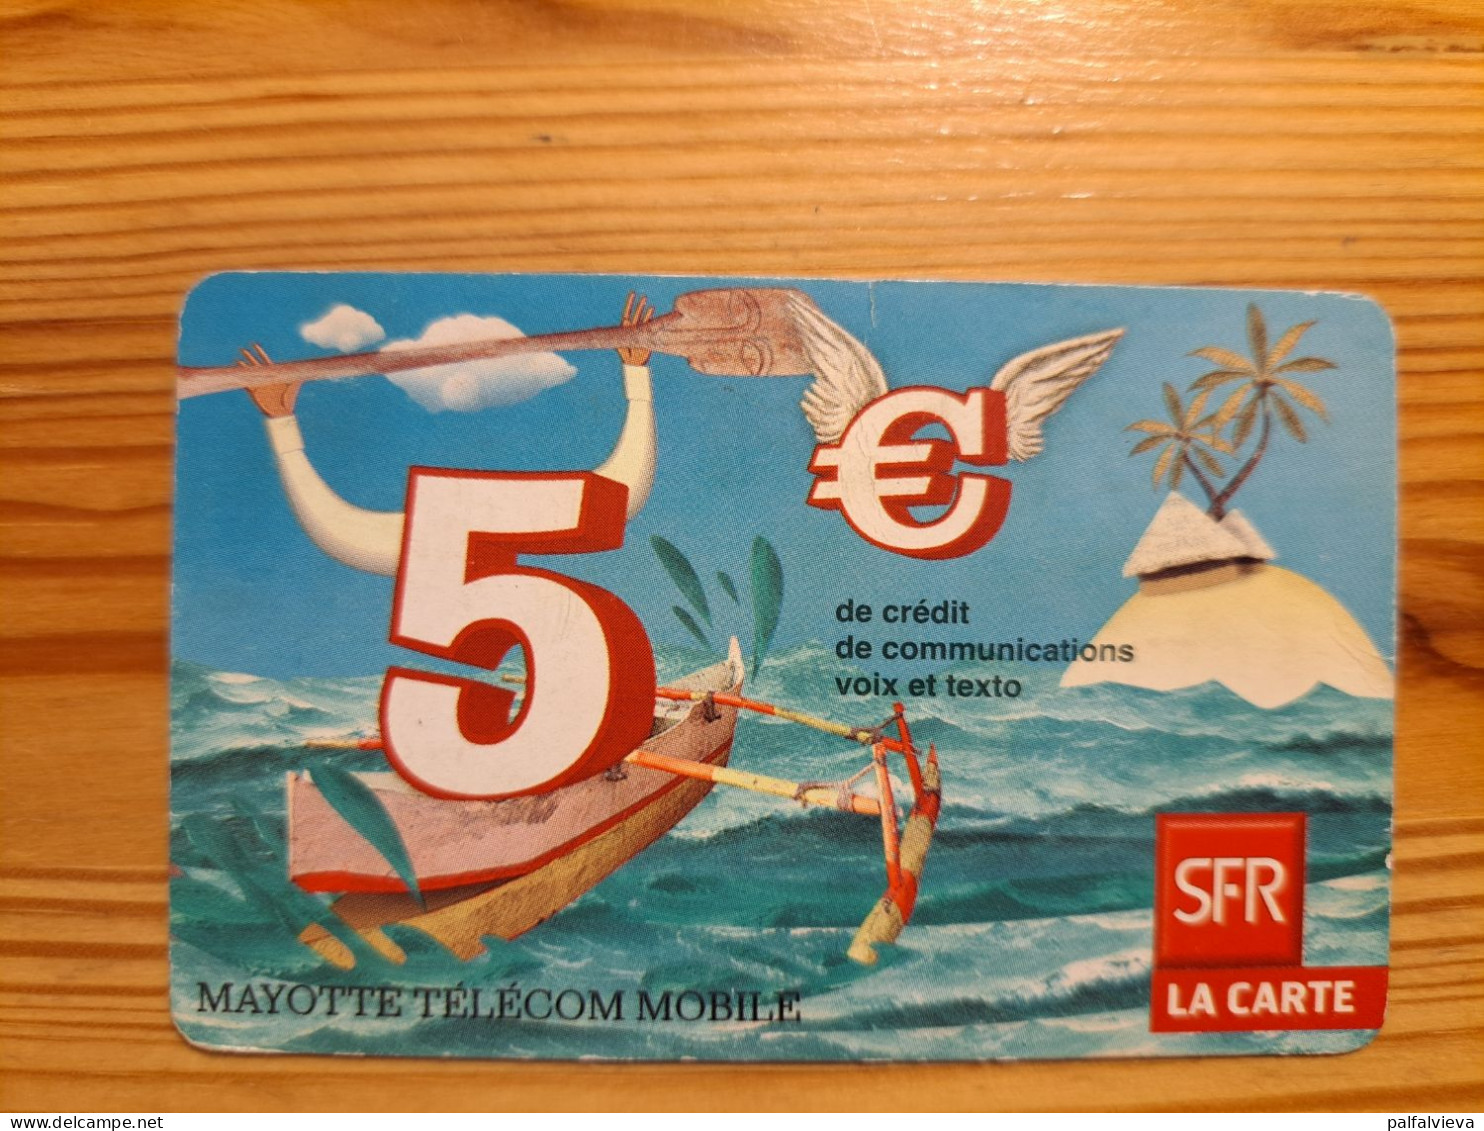 Prepaid Phonecard France, Mayotte, SFR - Cellphone Cards (refills)